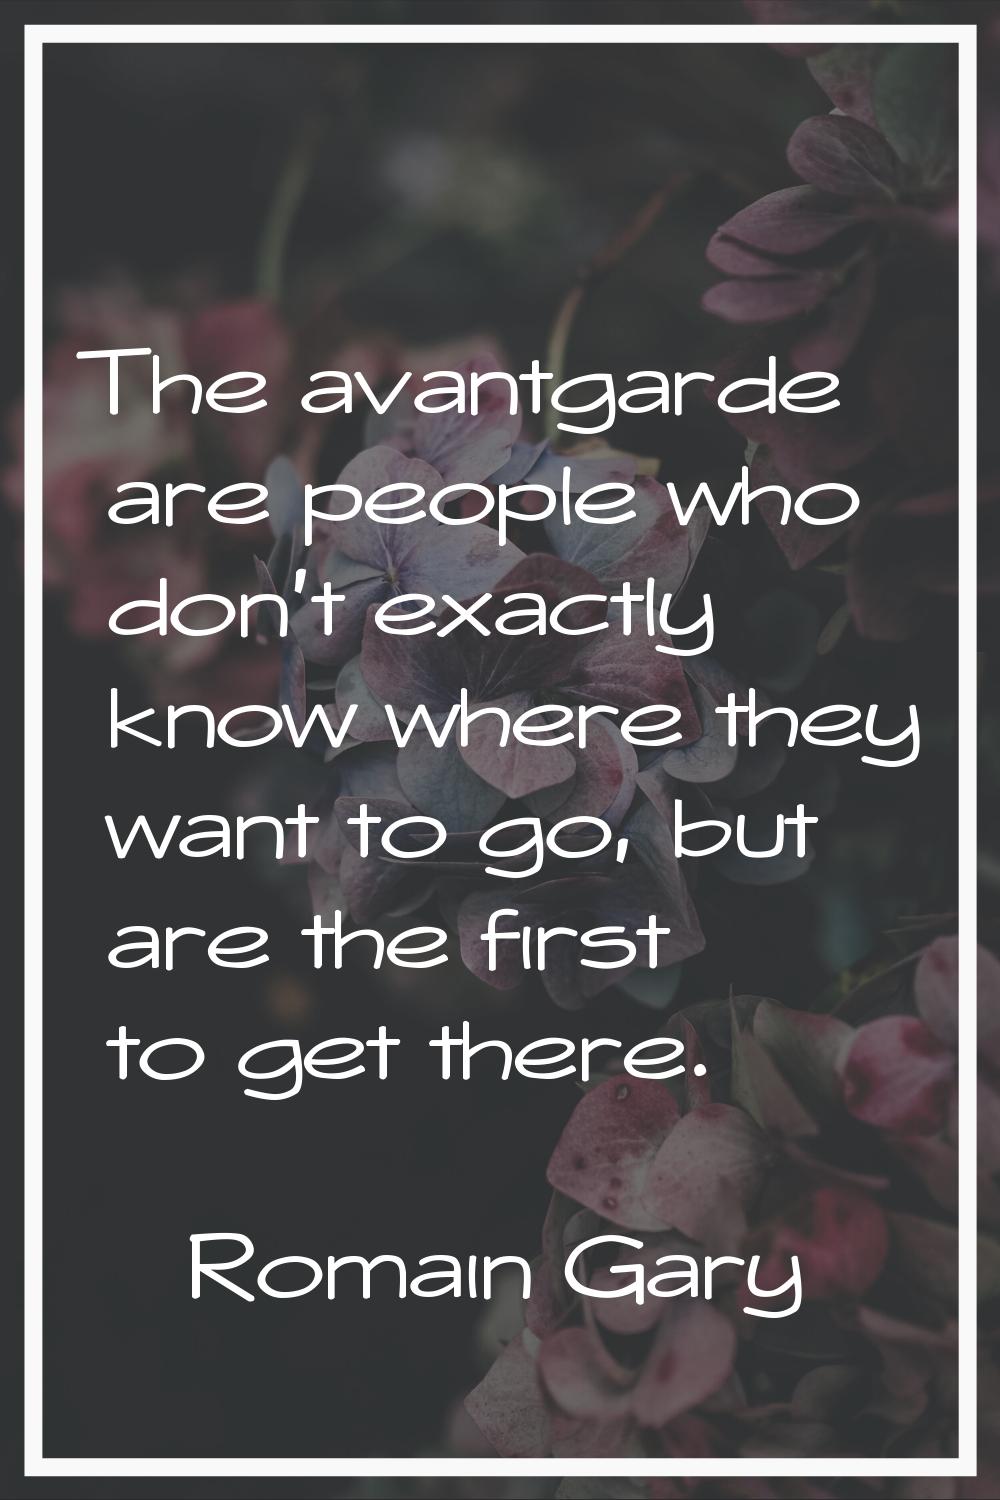 The avantgarde are people who don't exactly know where they want to go, but are the first to get th